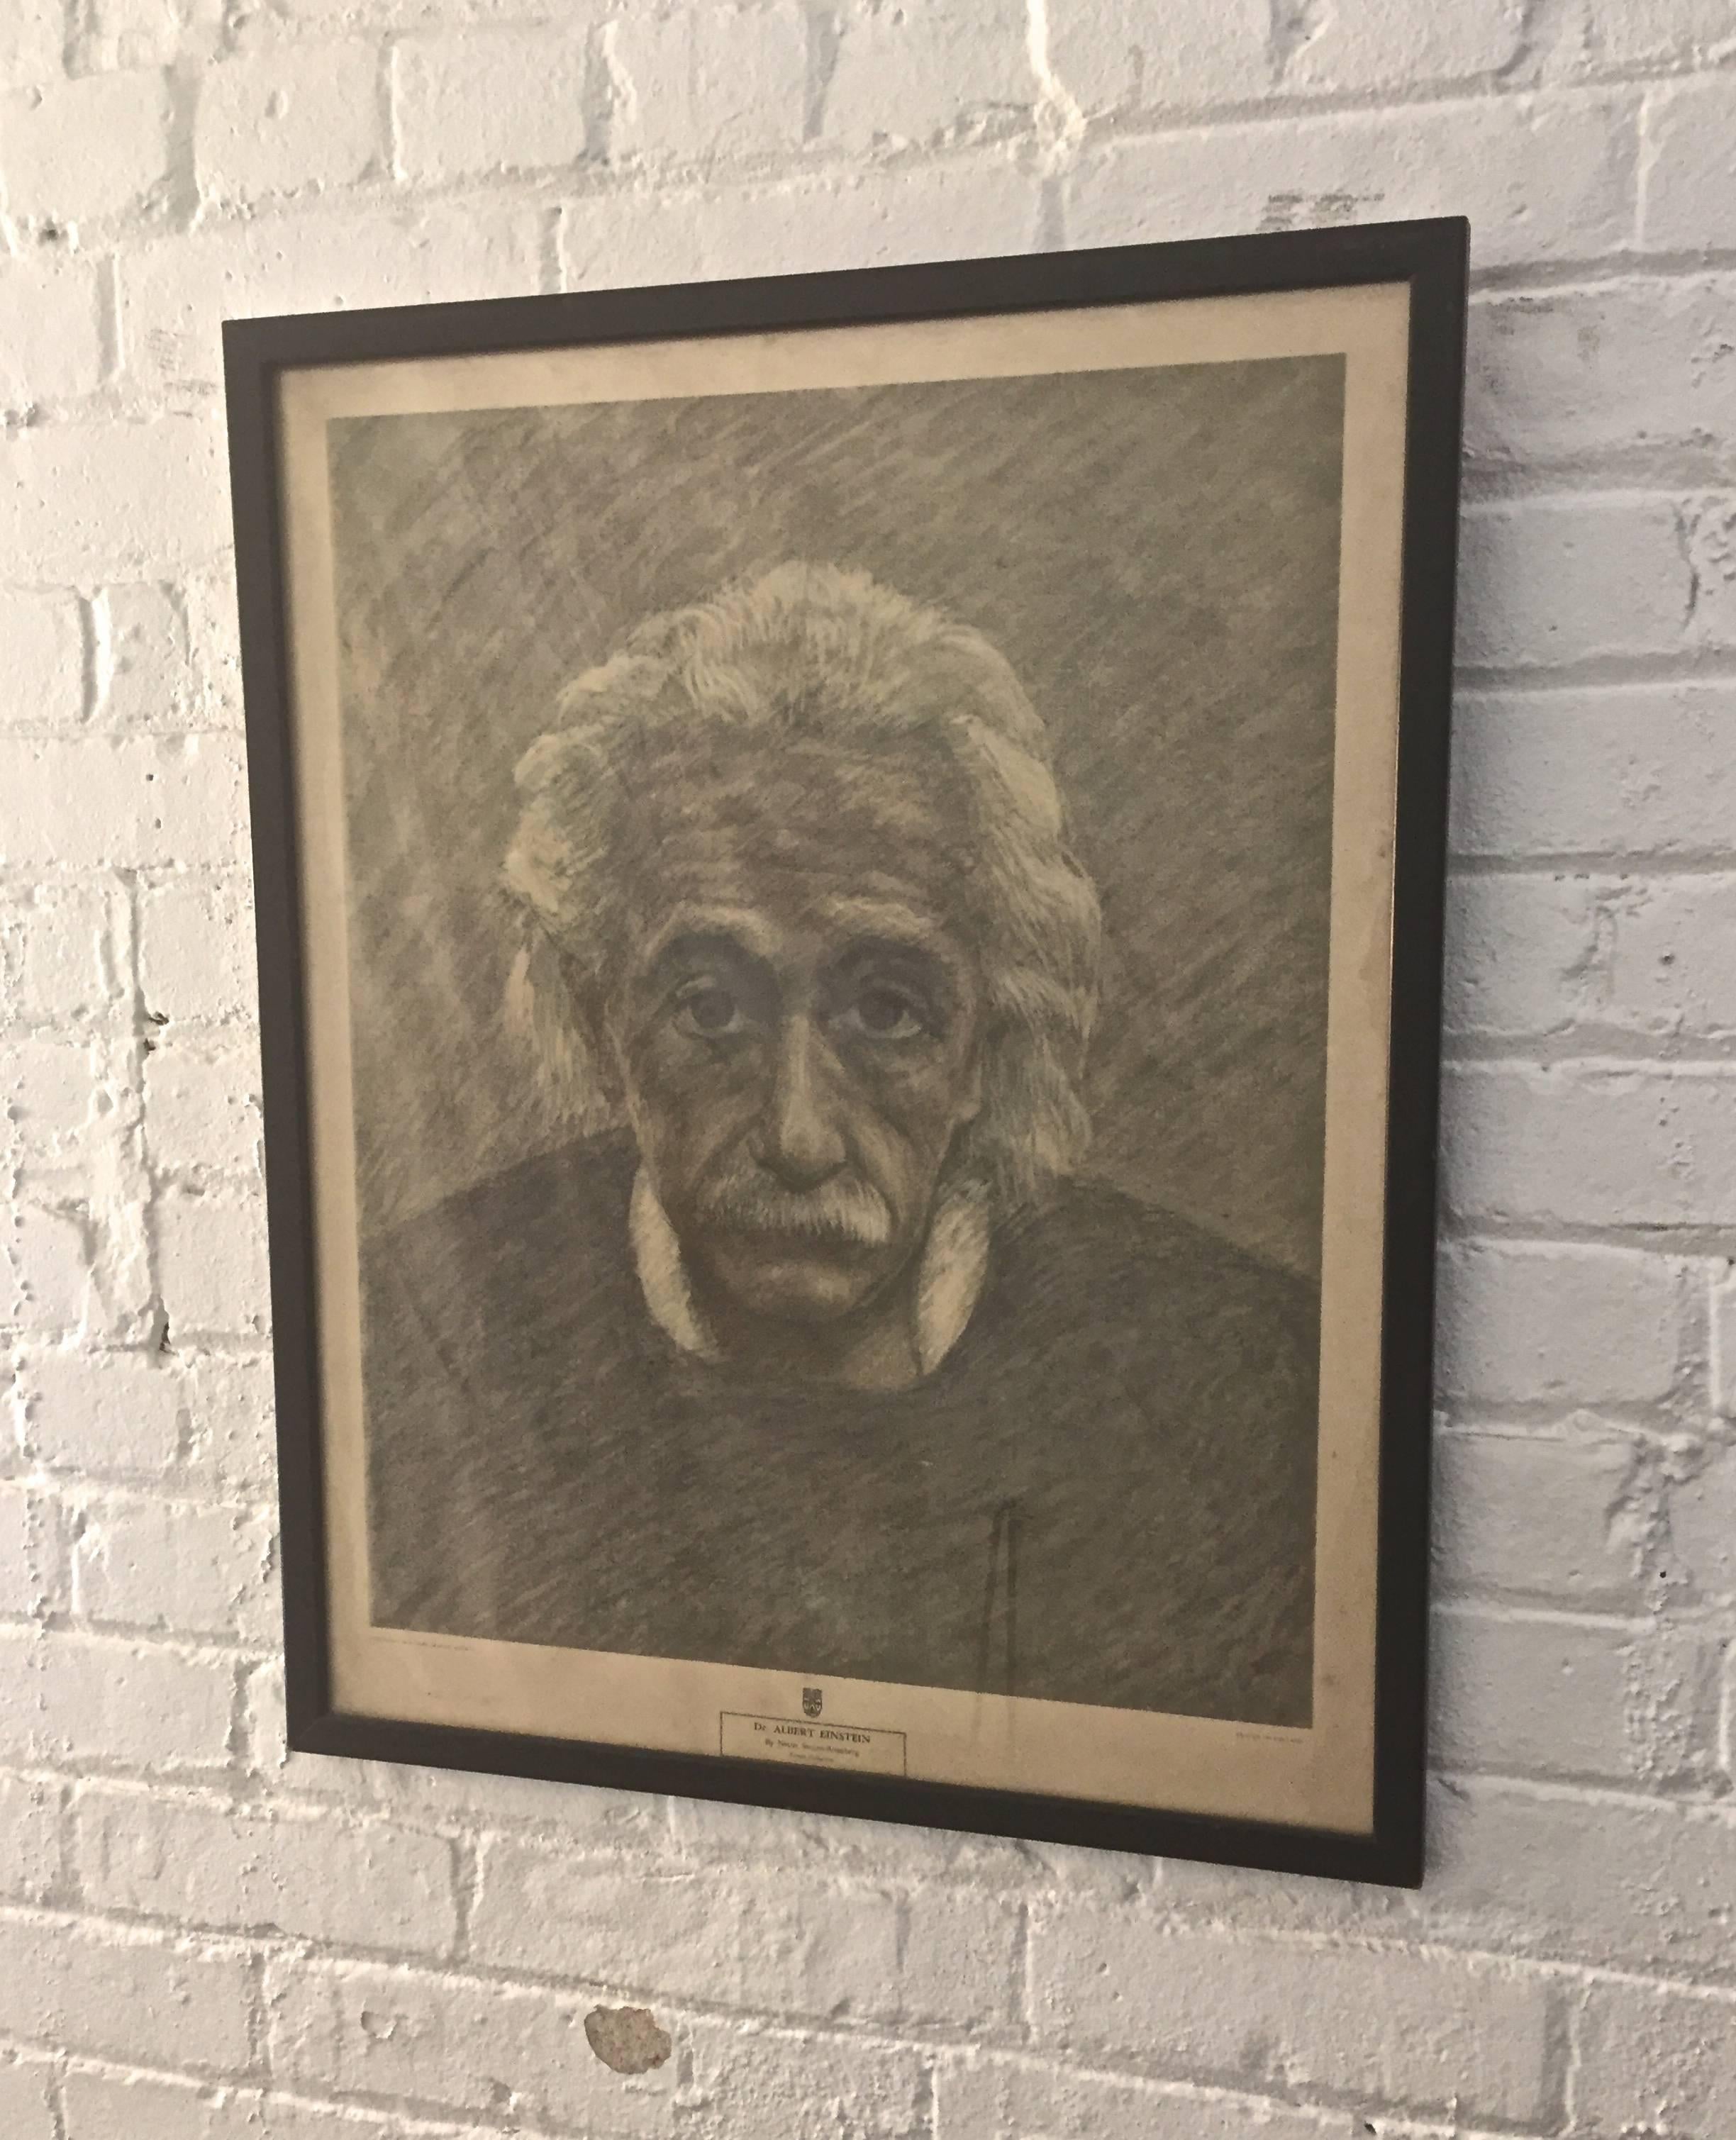 Wonderful off set print of Dr. Albert Einstein for the New York Graphic Society. The actual painting was executed by Nettie Steinjns-Bromberg. Printed in Holland.

Sight dimensions are 17.63